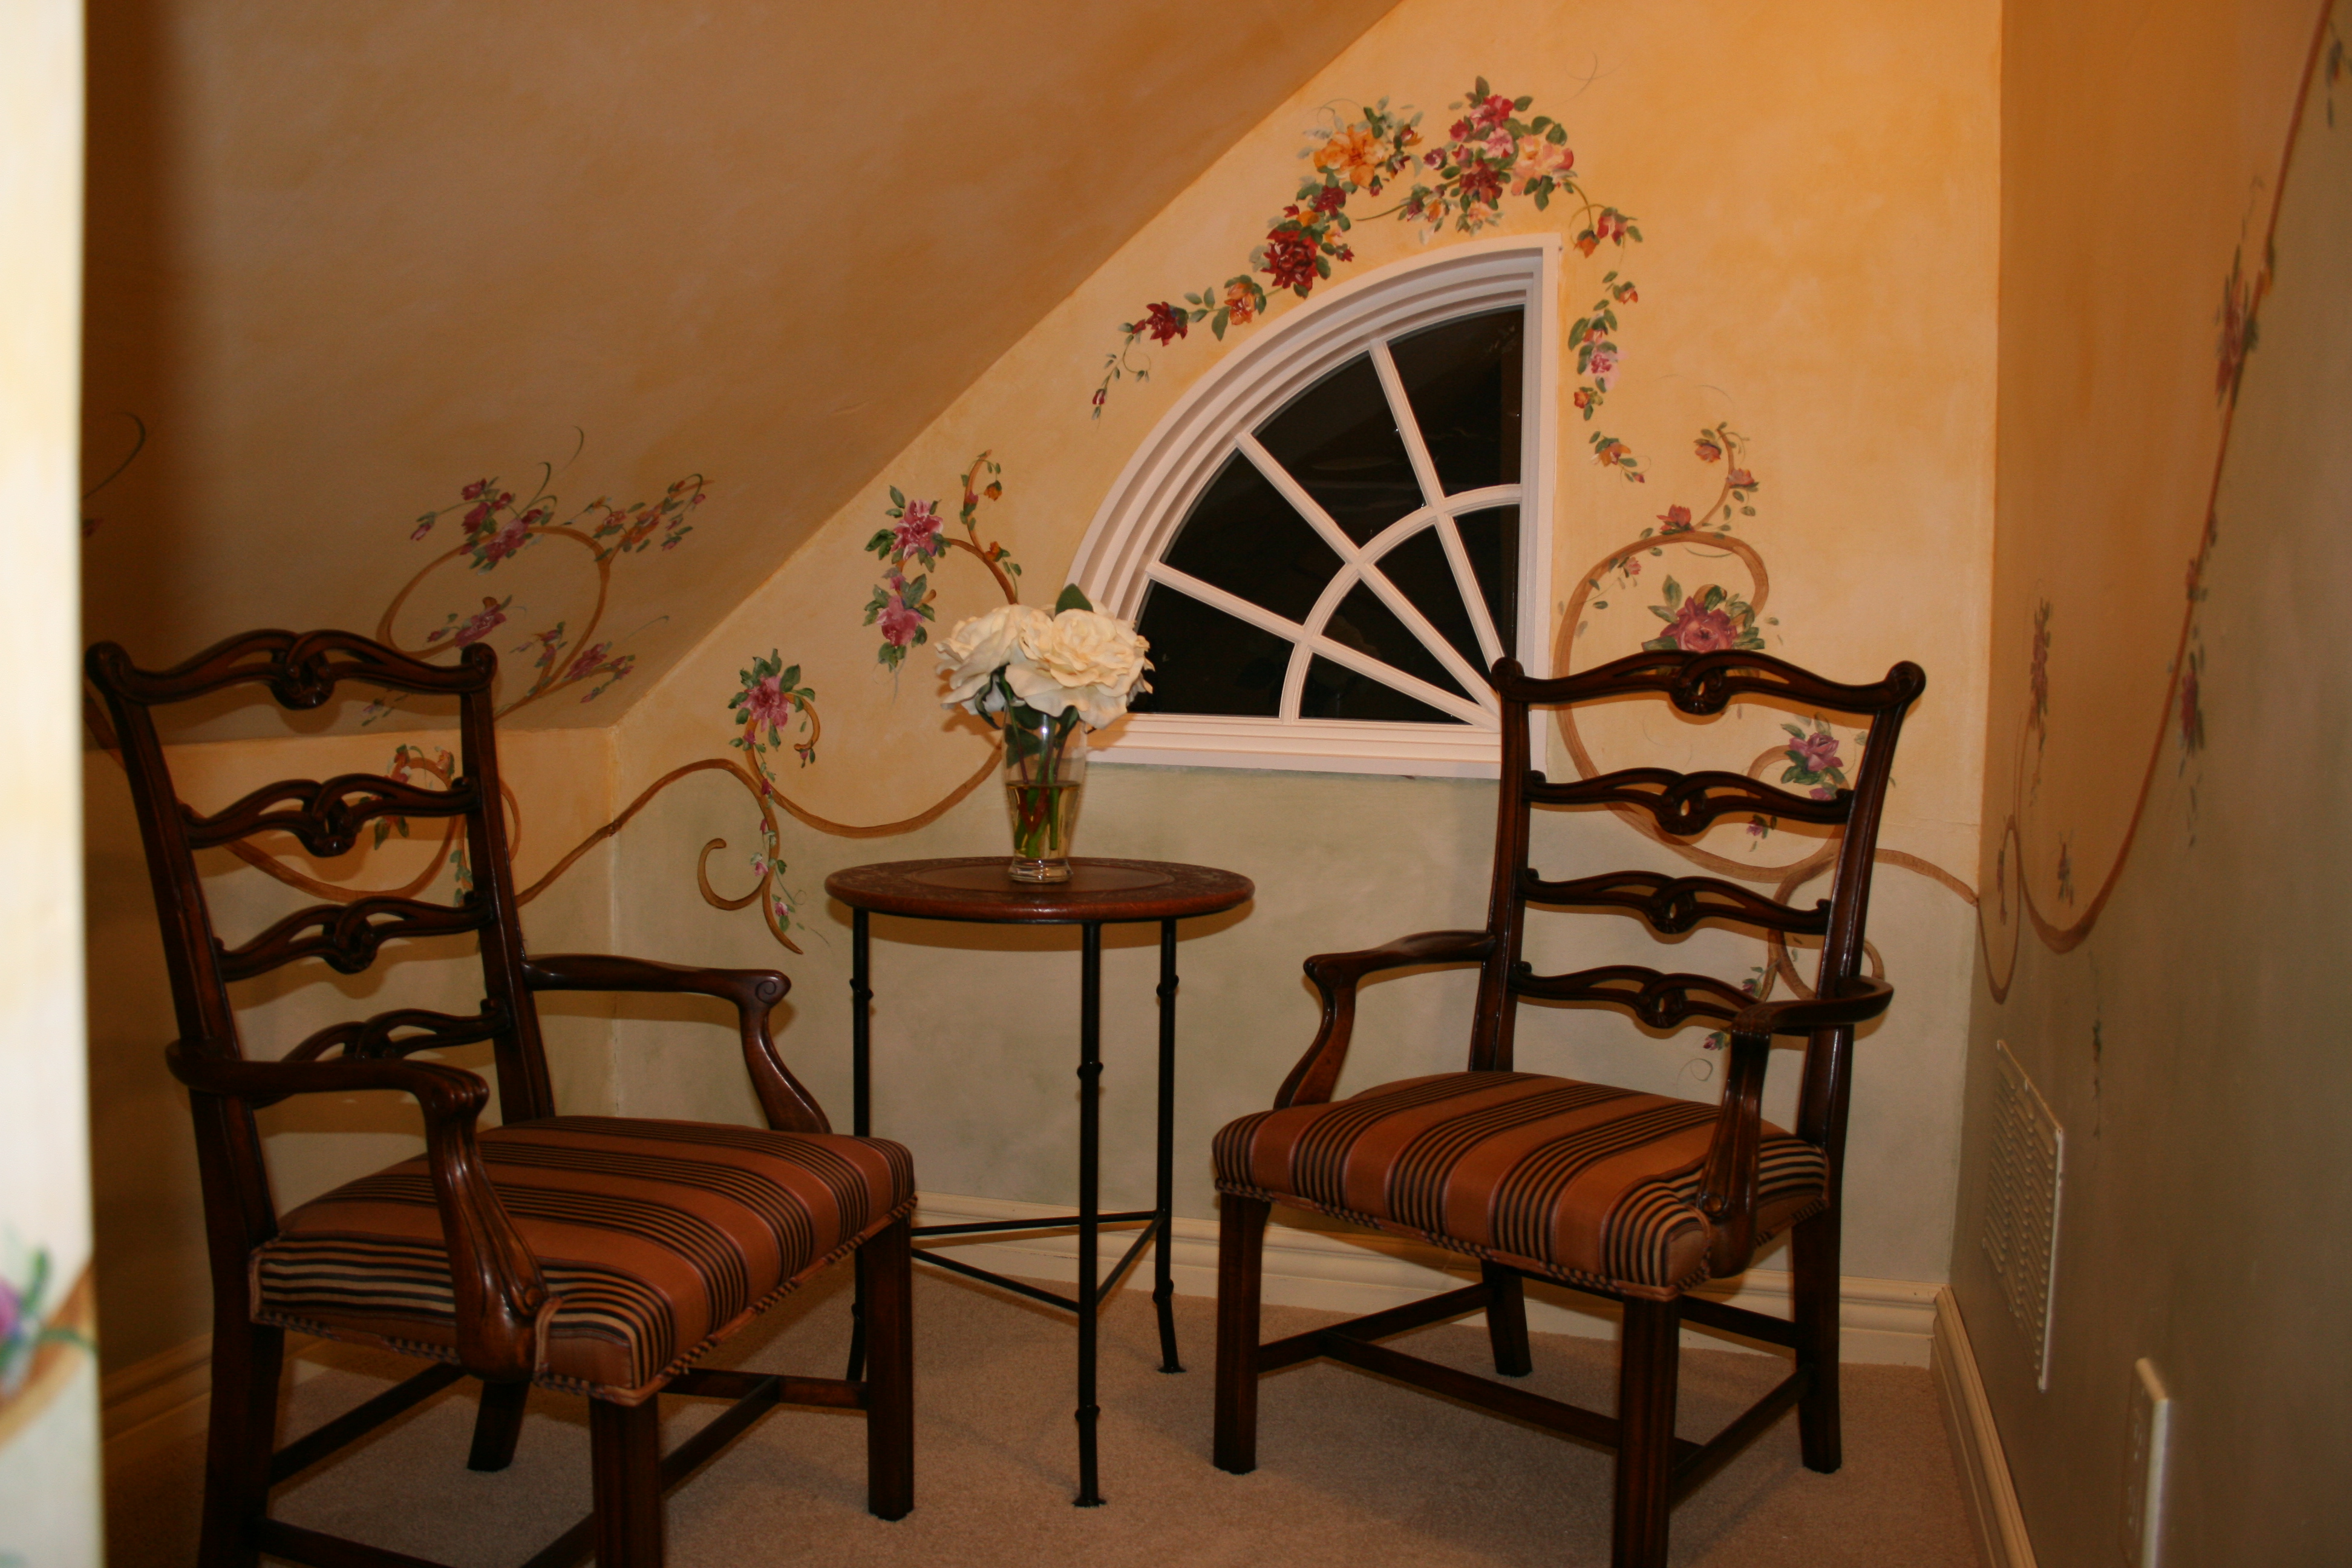 American Doll Furniture Room - Hand painted vines & Scrolls in a children's play room Vines & Scroll